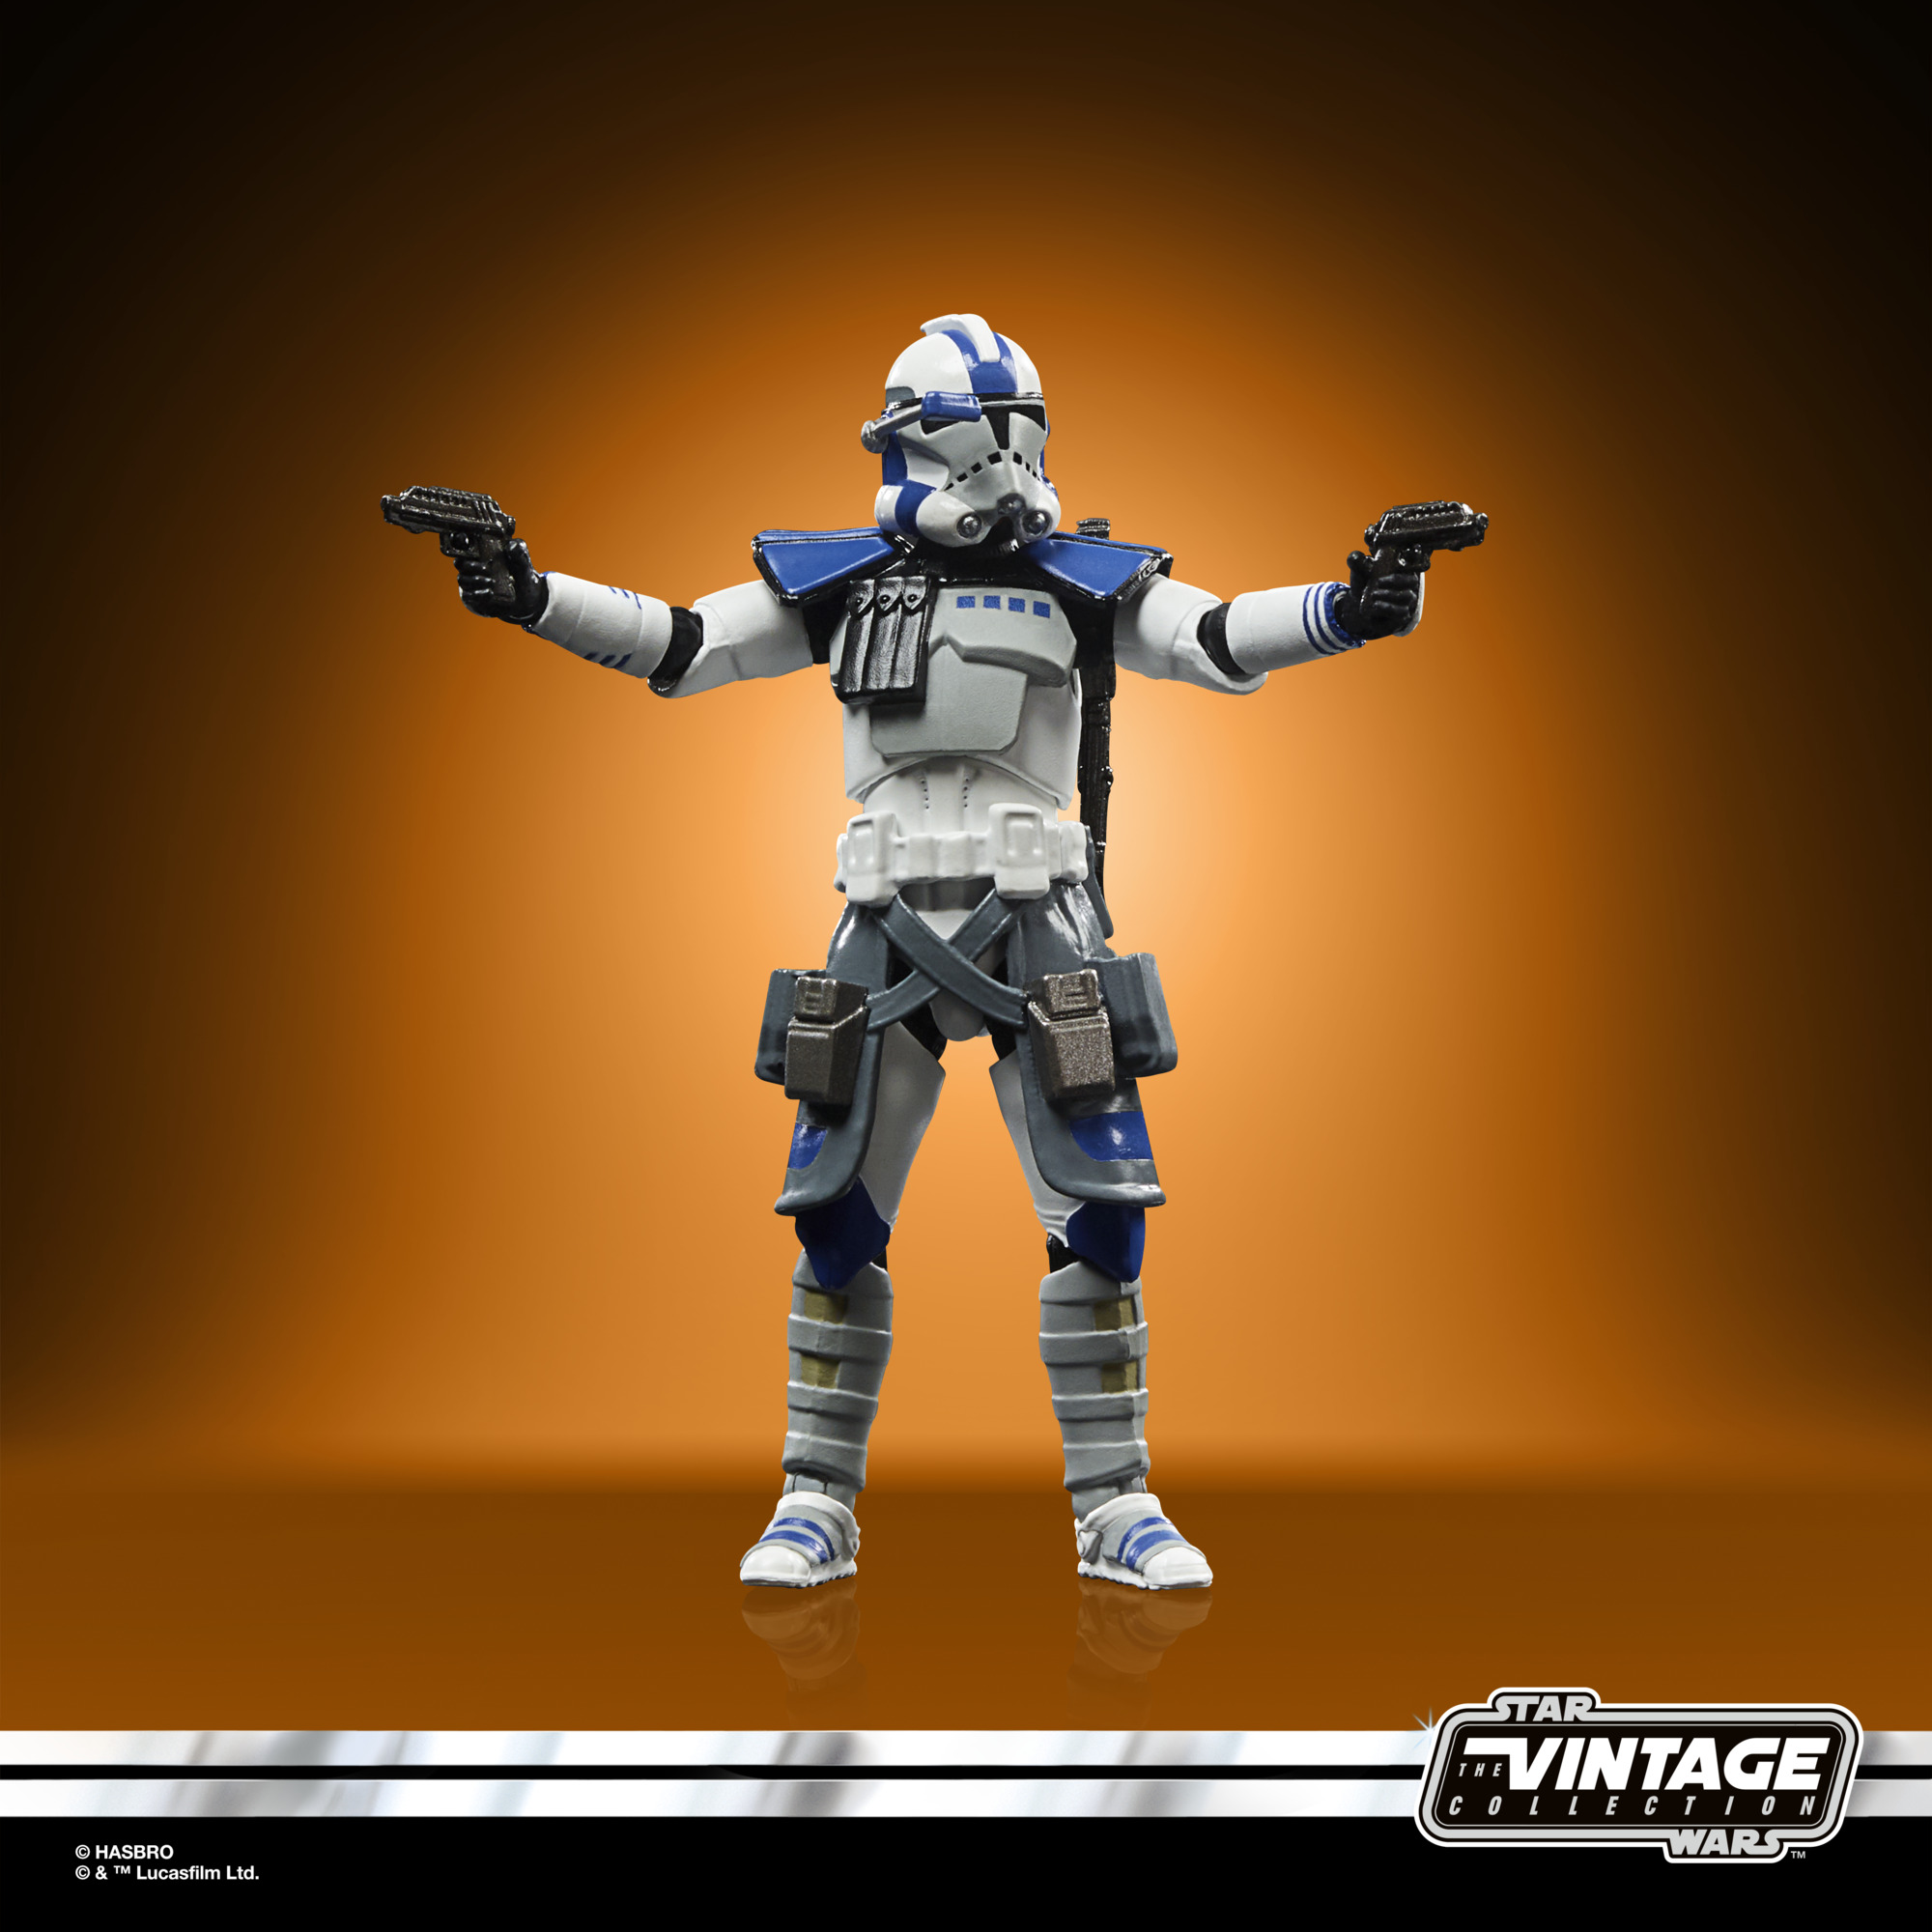 Star Wars: The Clone Wars The Vintage Collection ARC Commander Havoc Kids Toy Action Figure for Boys and Girls Ages 4 5 6 7 8 and Up (3.75”) - image 5 of 10